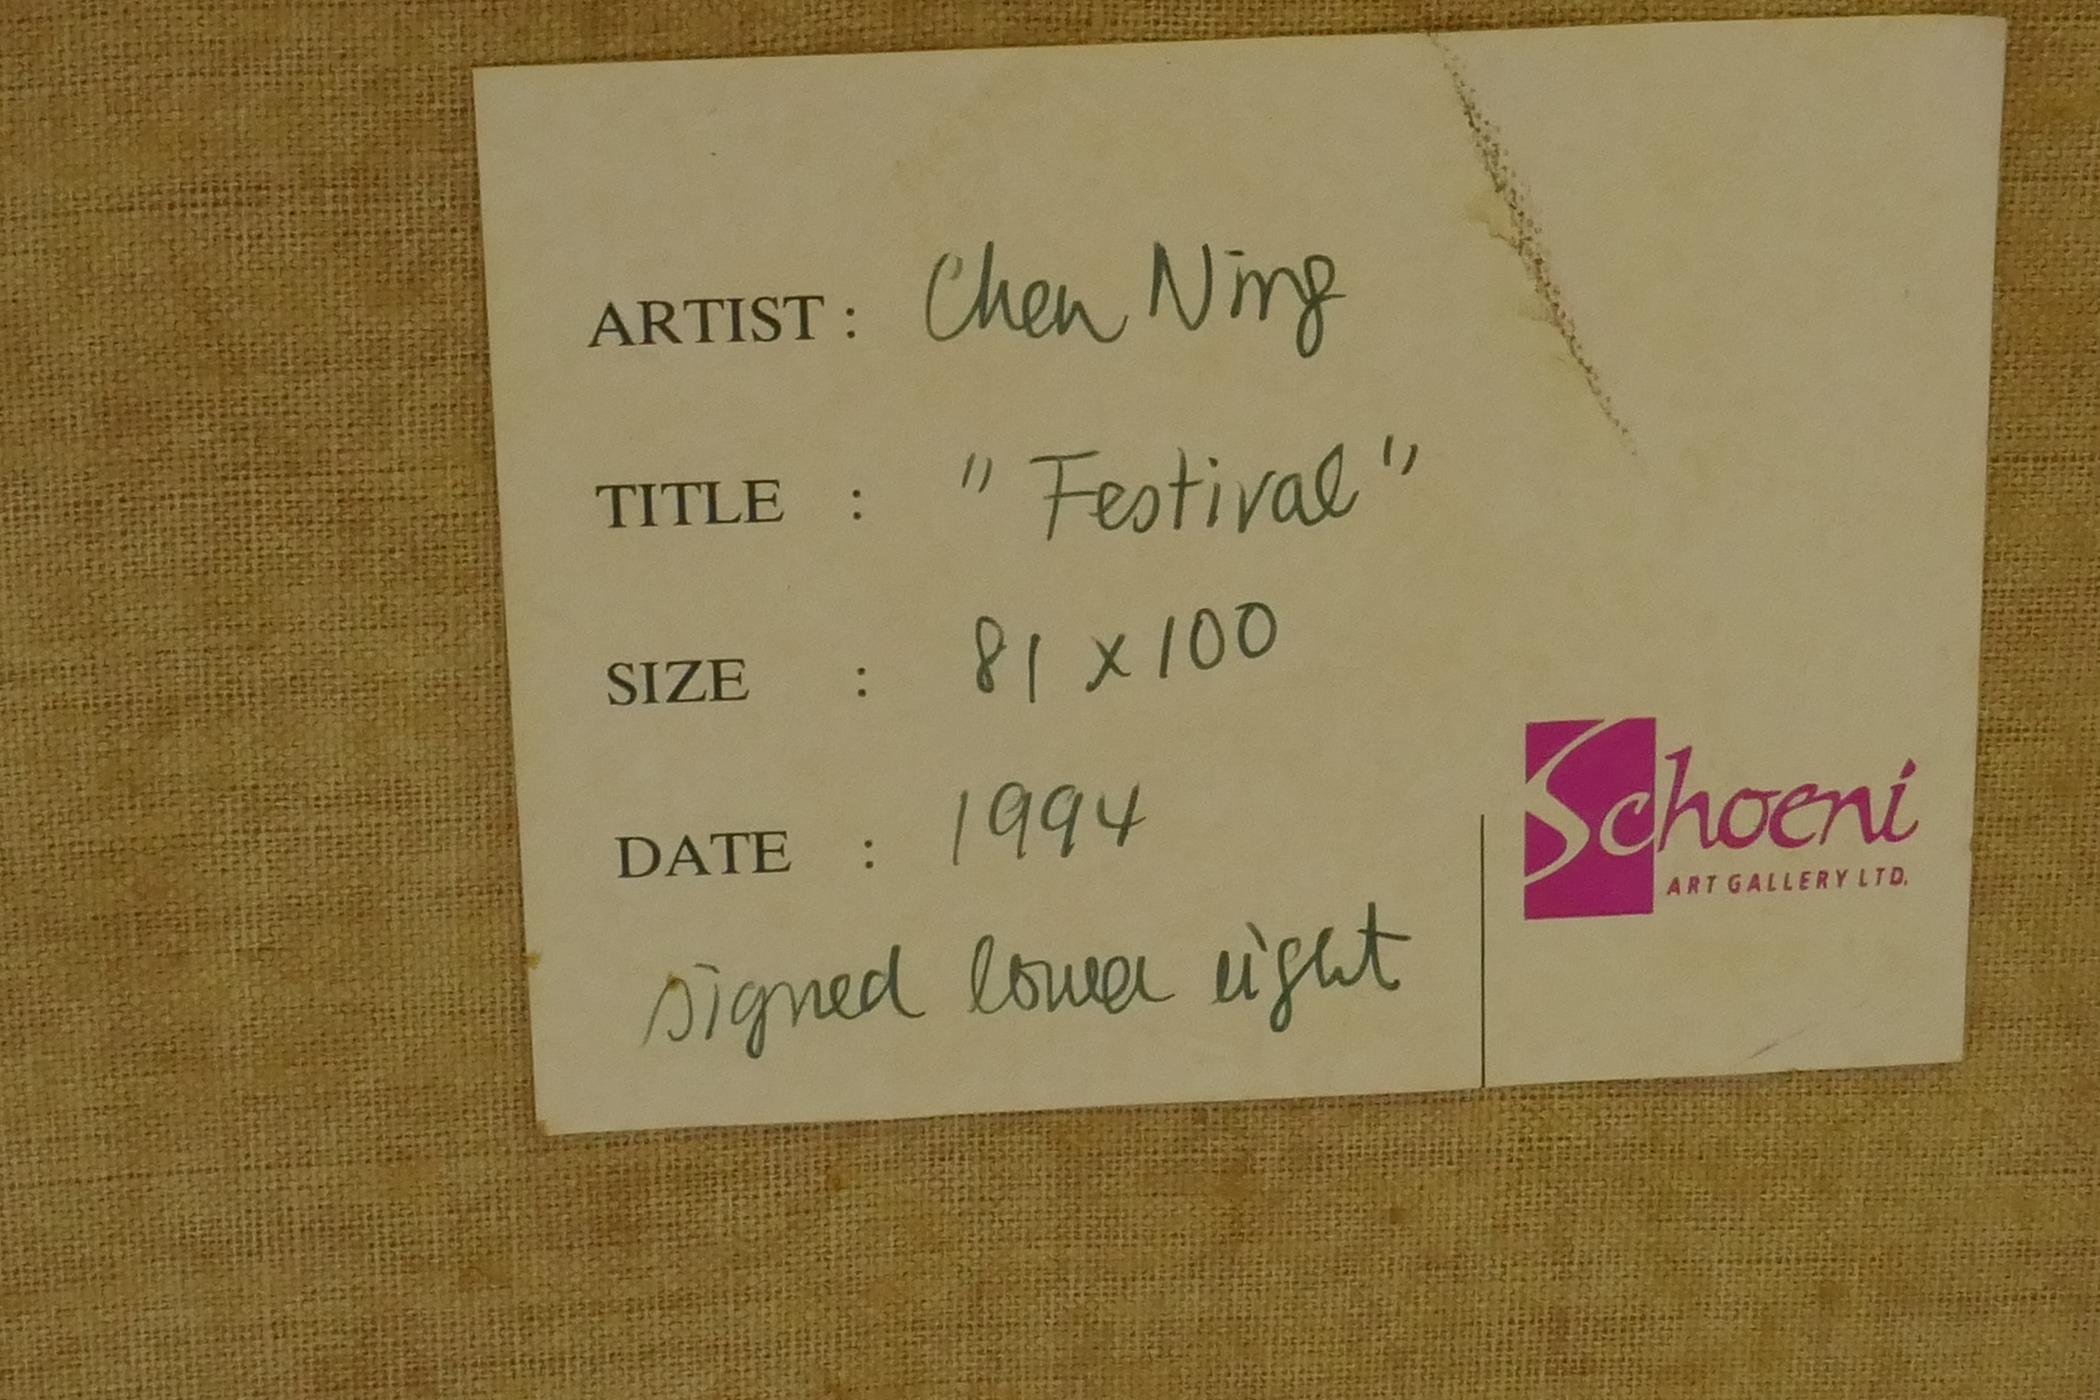 Chen Ning, (Chinese), Festival, signed and dated 3.3.1994, gallery label verso Schoeni Art Galleries - Image 9 of 12